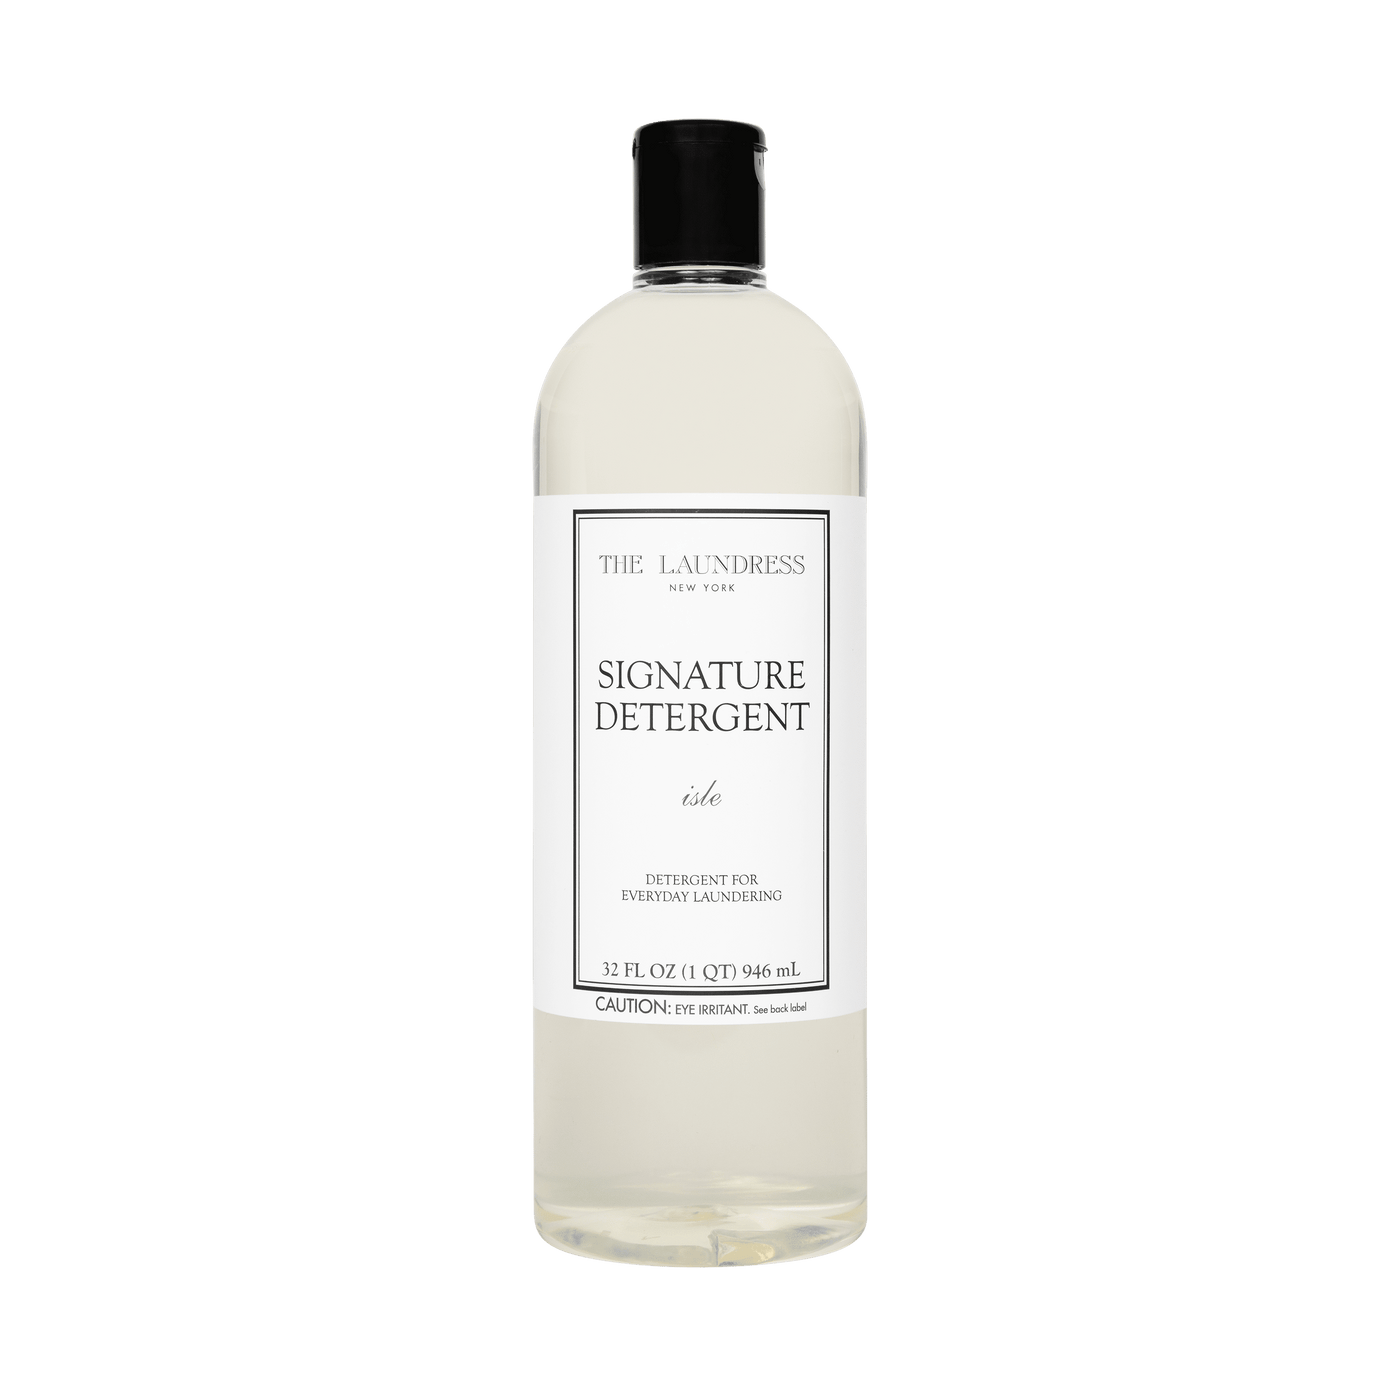 The Laundress Signature Detergent in the scent Isle with notes of heliotrope, jasmine, and sandalwood.